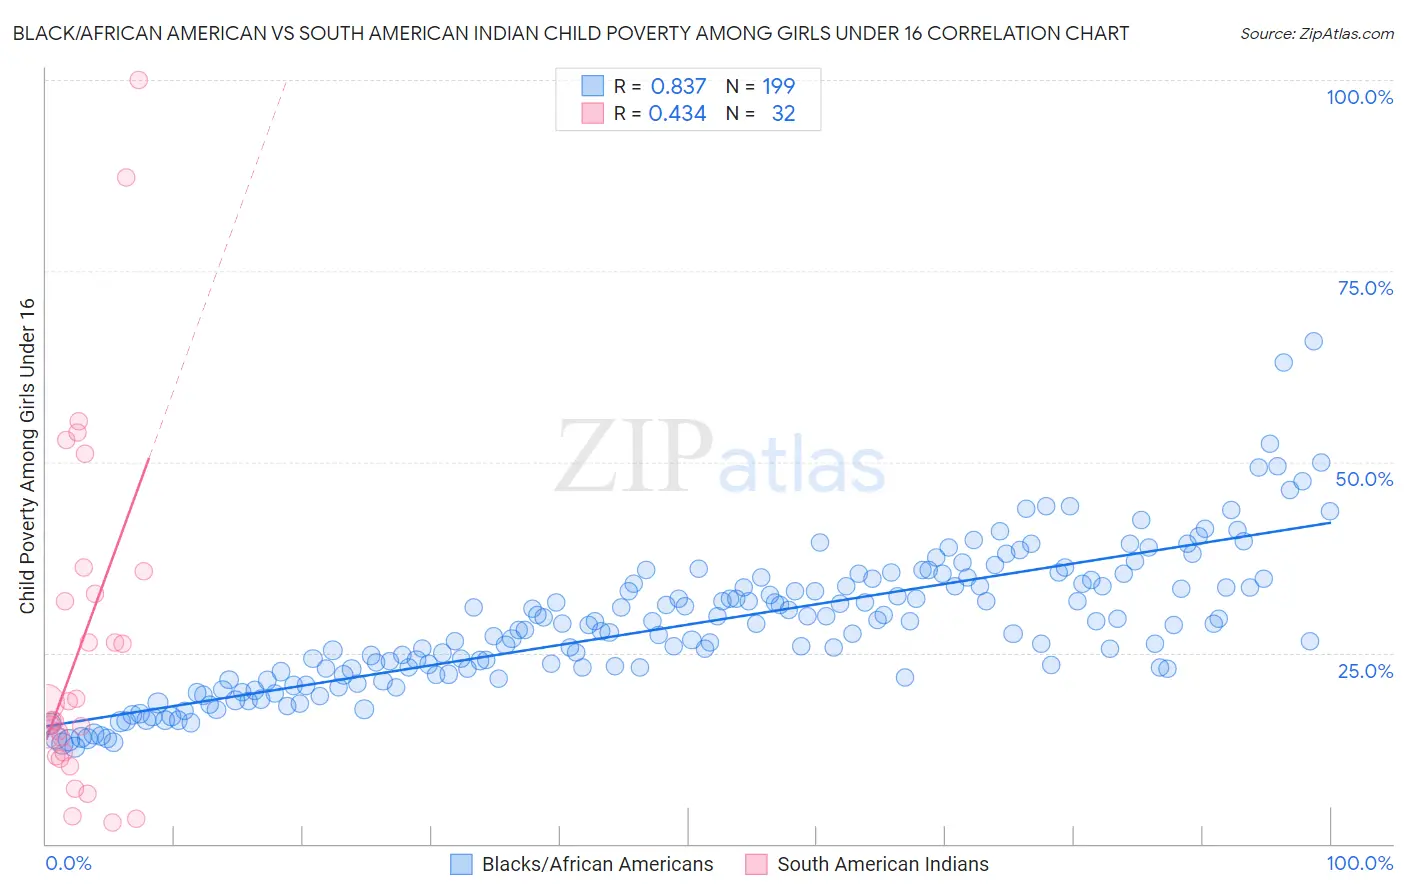 Black/African American vs South American Indian Child Poverty Among Girls Under 16